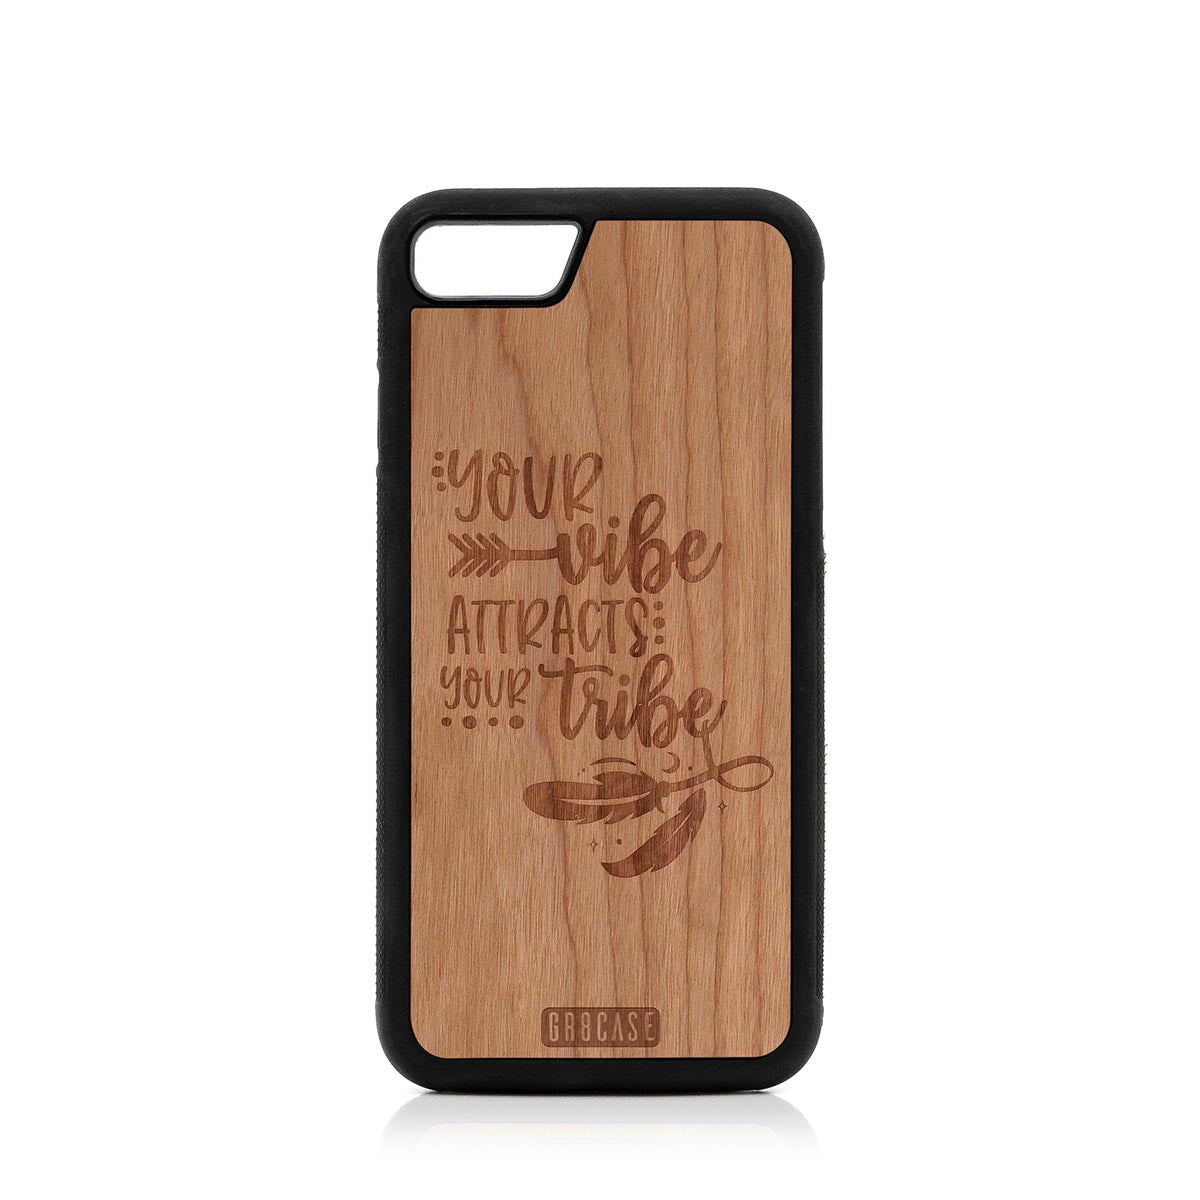 Your Vibe Attracts Your Tribe Design Wood Case For iPhone 7/8